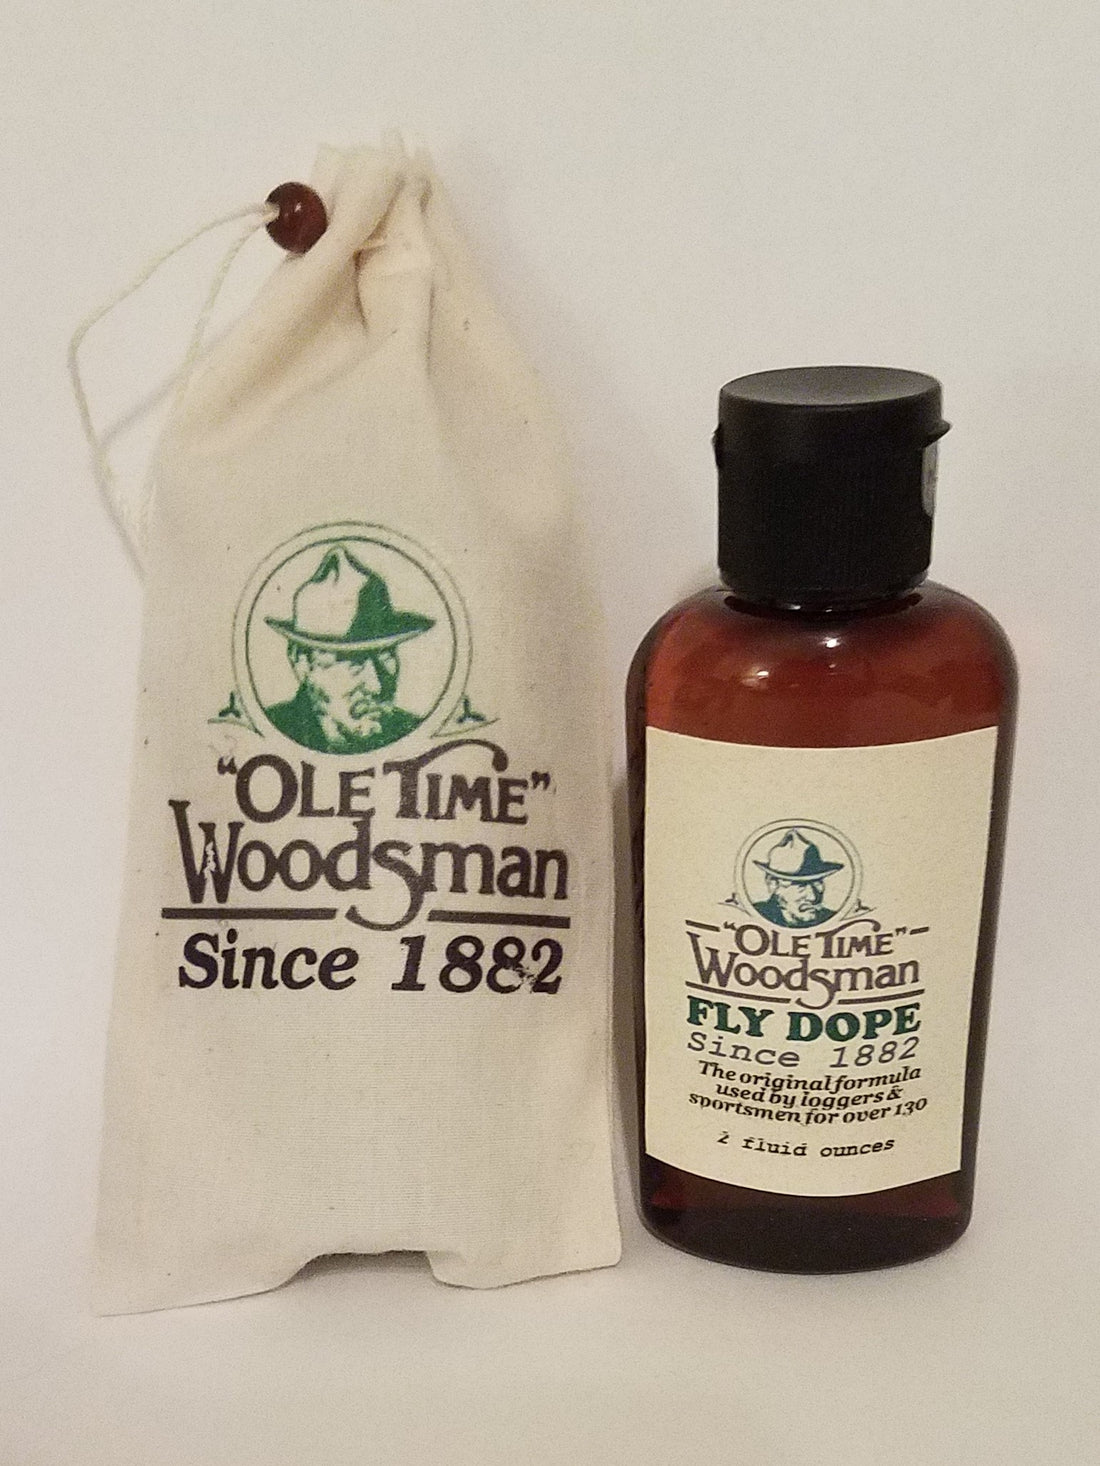 The World has Finally Discovered Ole Time Woodsman Fly Dope!